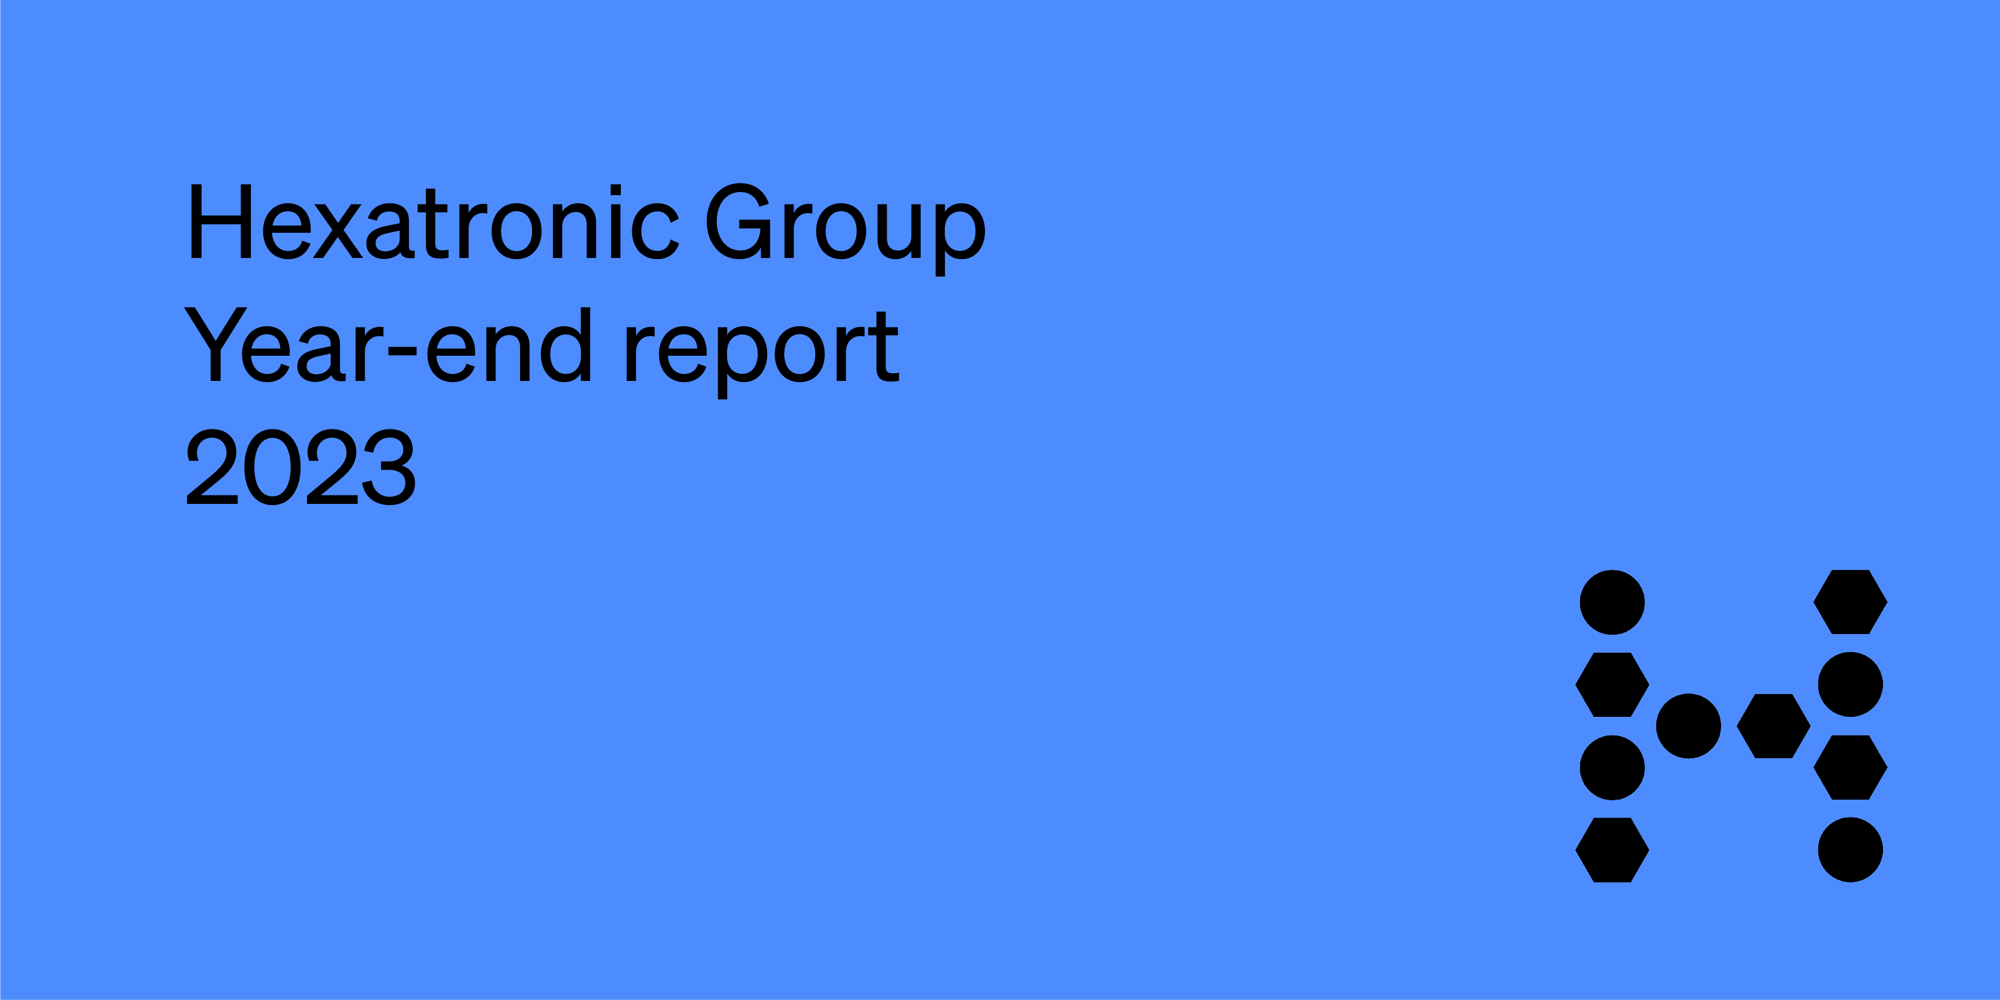 Hexatronic Group presents year-end report 2023